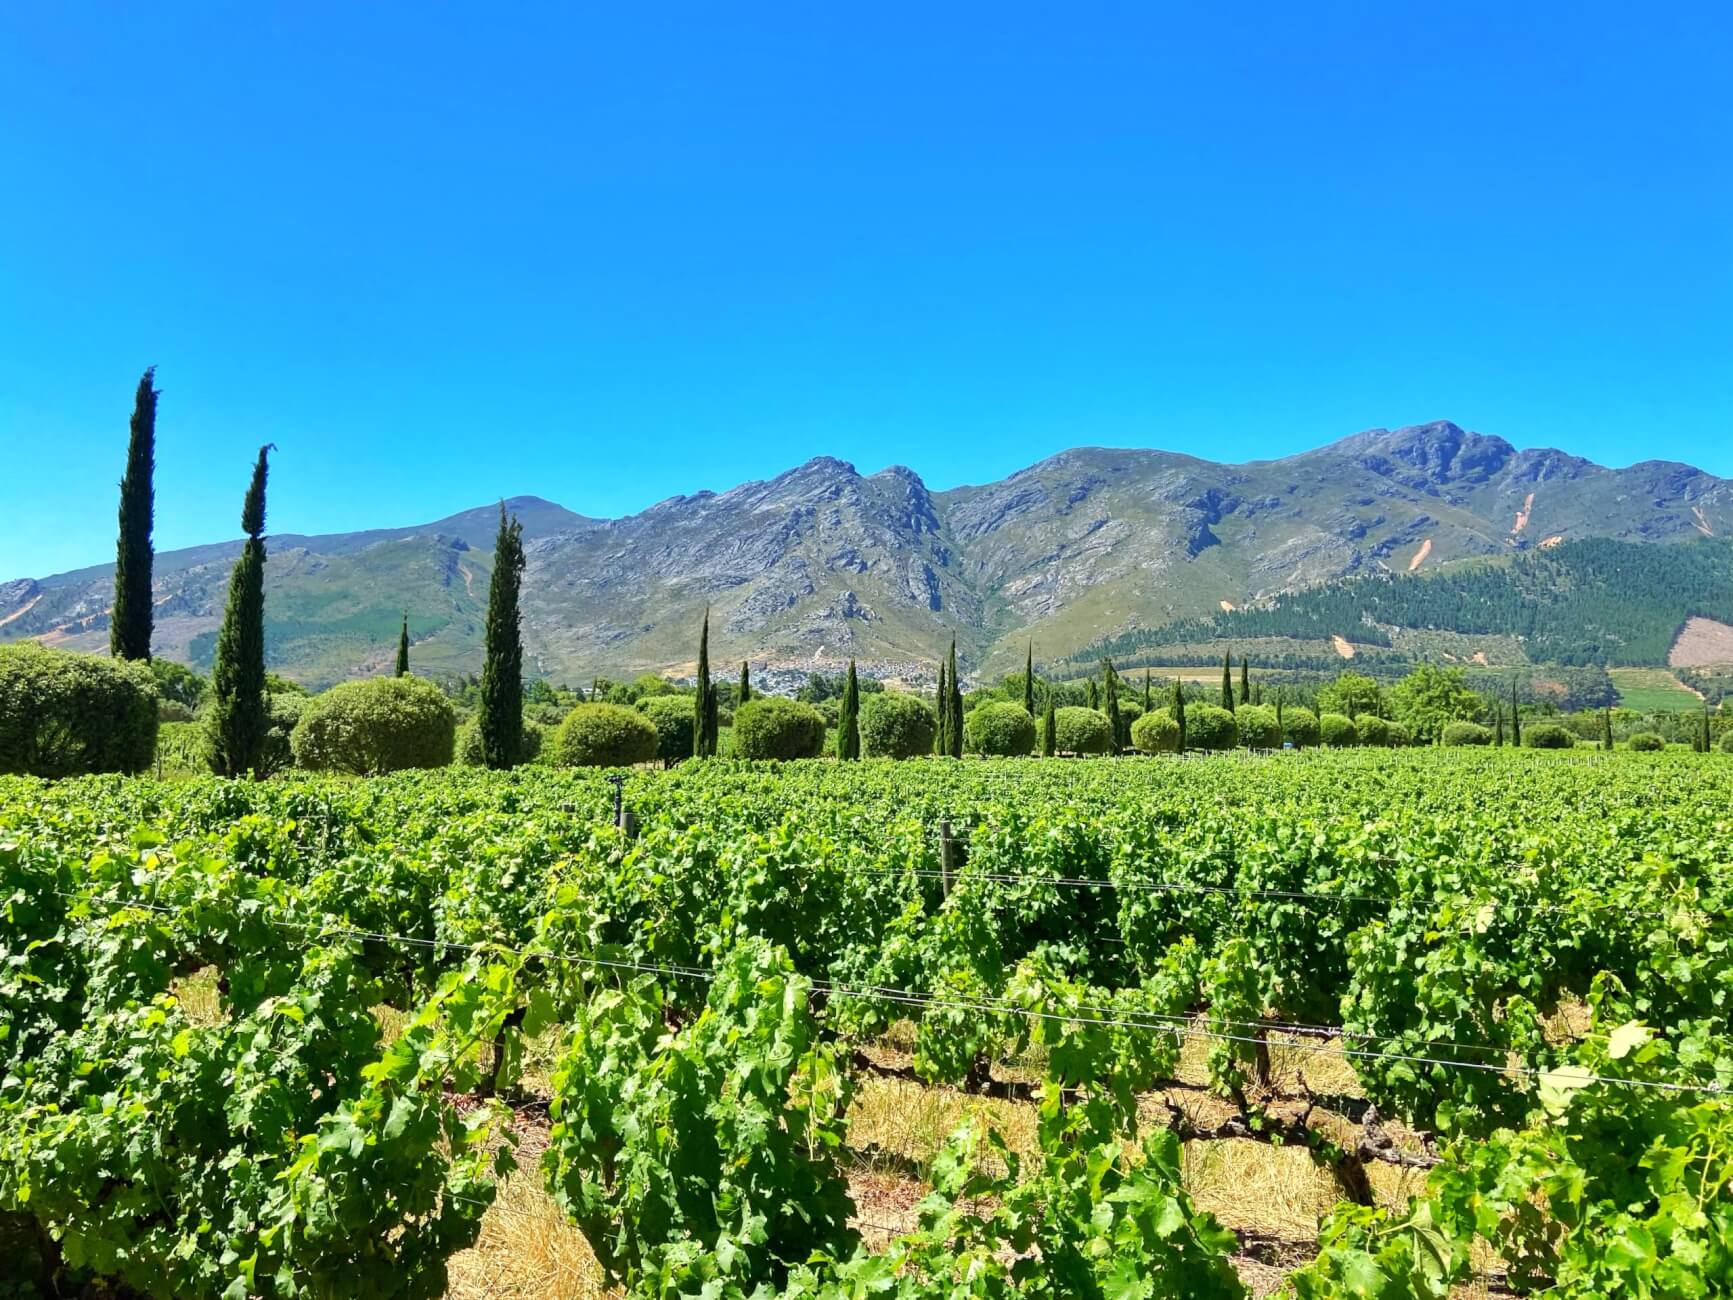 Visiting The Cape Winelands from Cape Town: Stellenbosch or Franschhoek?